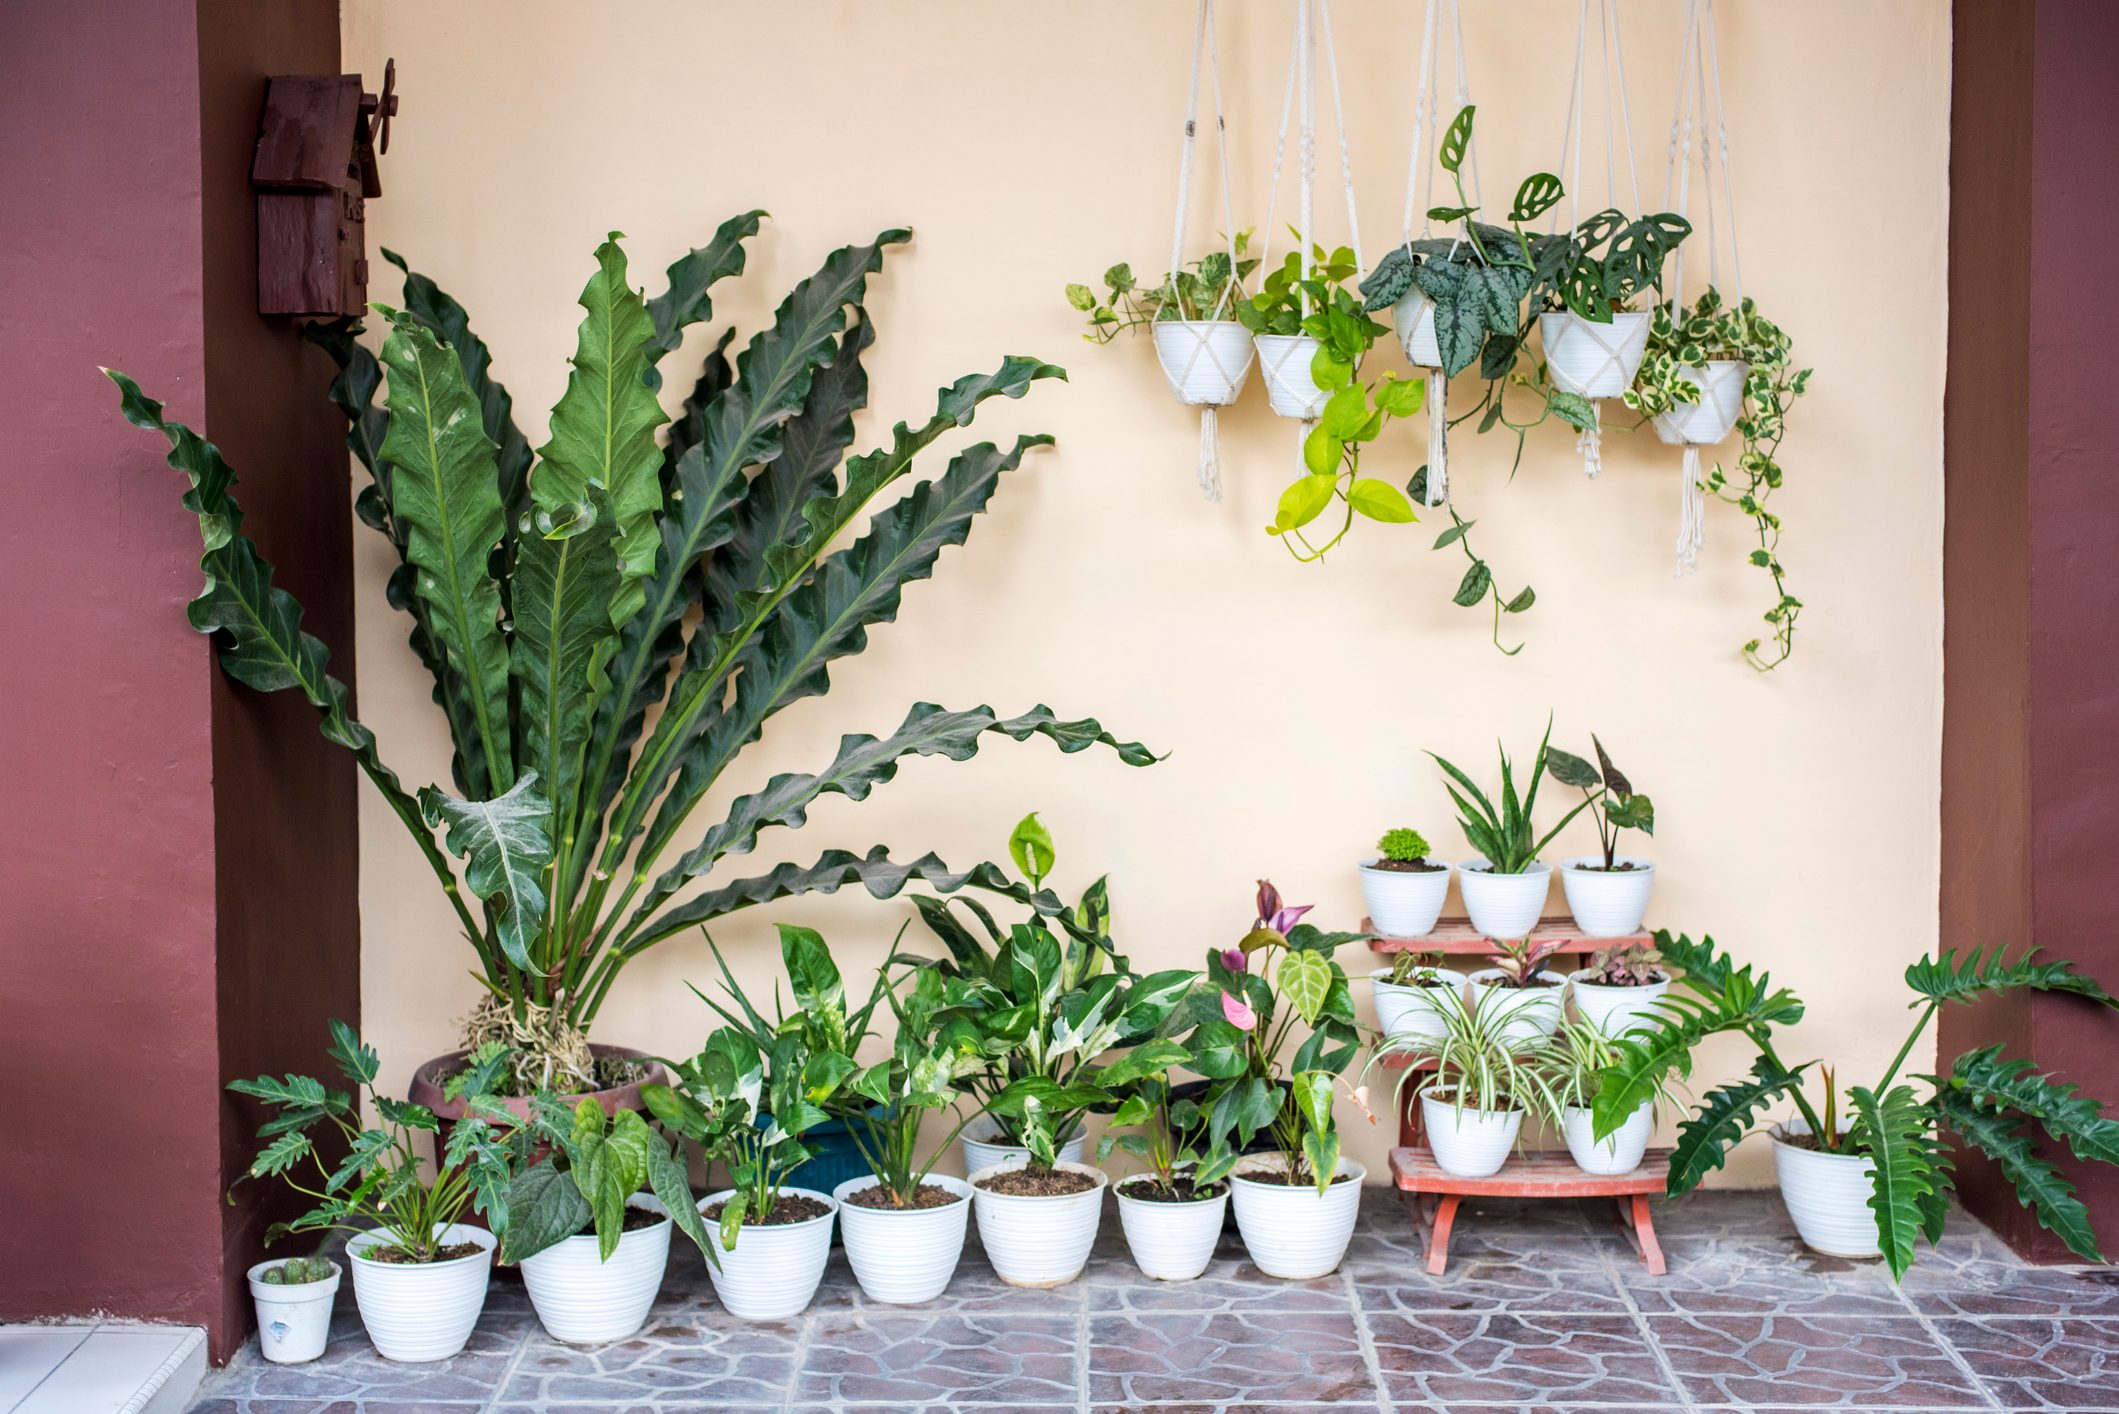 When Can I Move My Houseplants Outside?